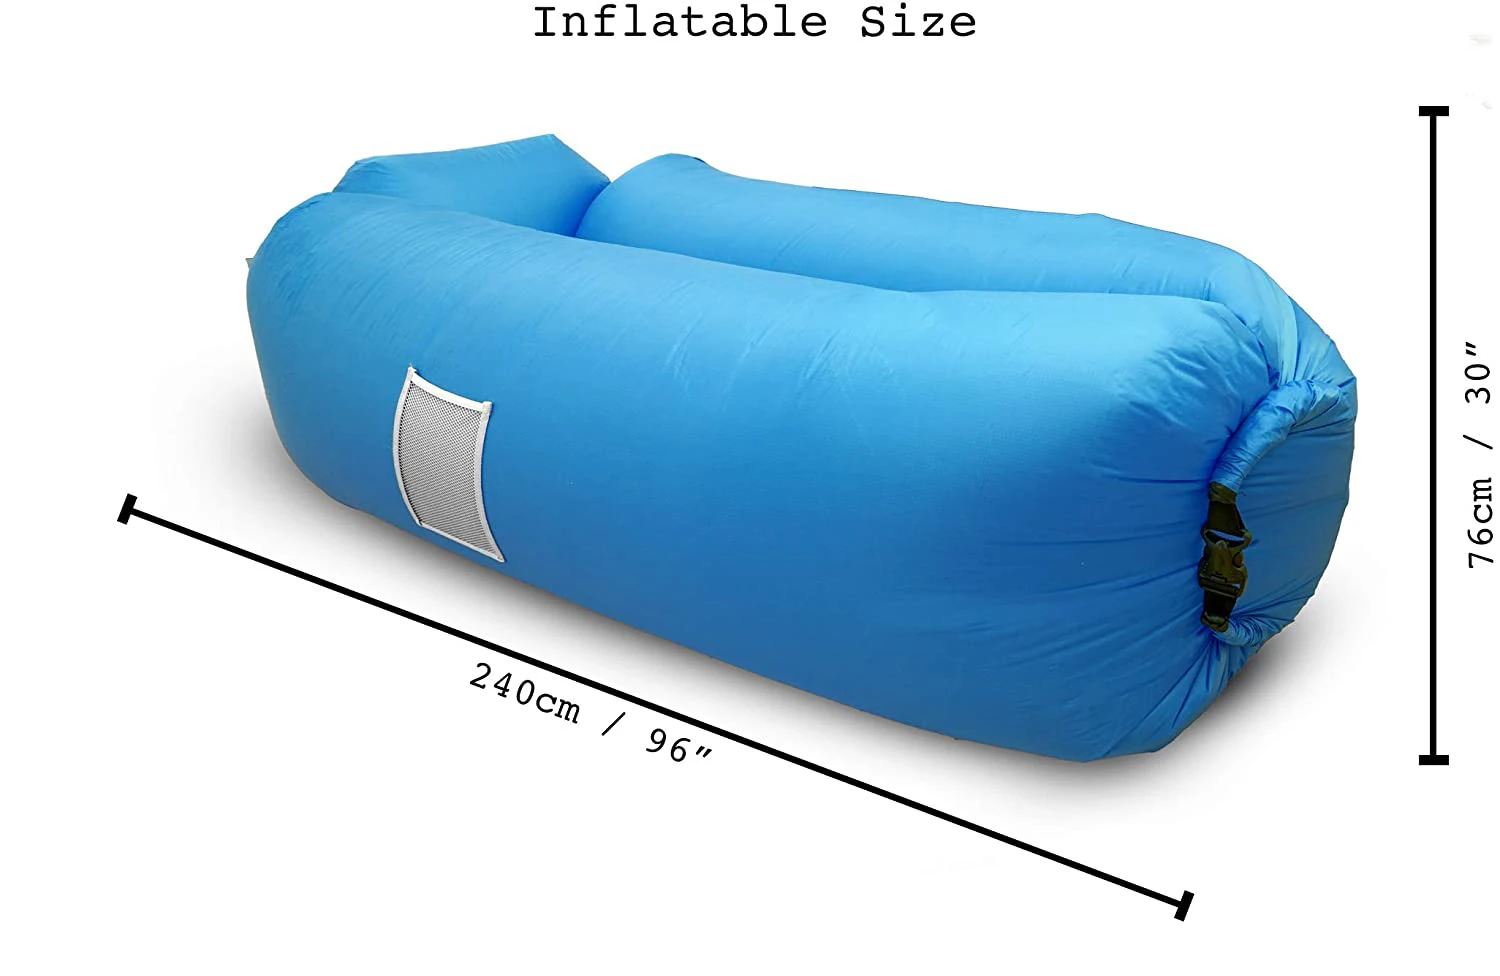 Anktry Inflatable Lounger Air Sofa Hammock-Portable,Water Proof& Anti-Air Leaking Design-Ideal Couch for Backyard Lakeside Beach Traveling Camping Picnics & Music Festivals 